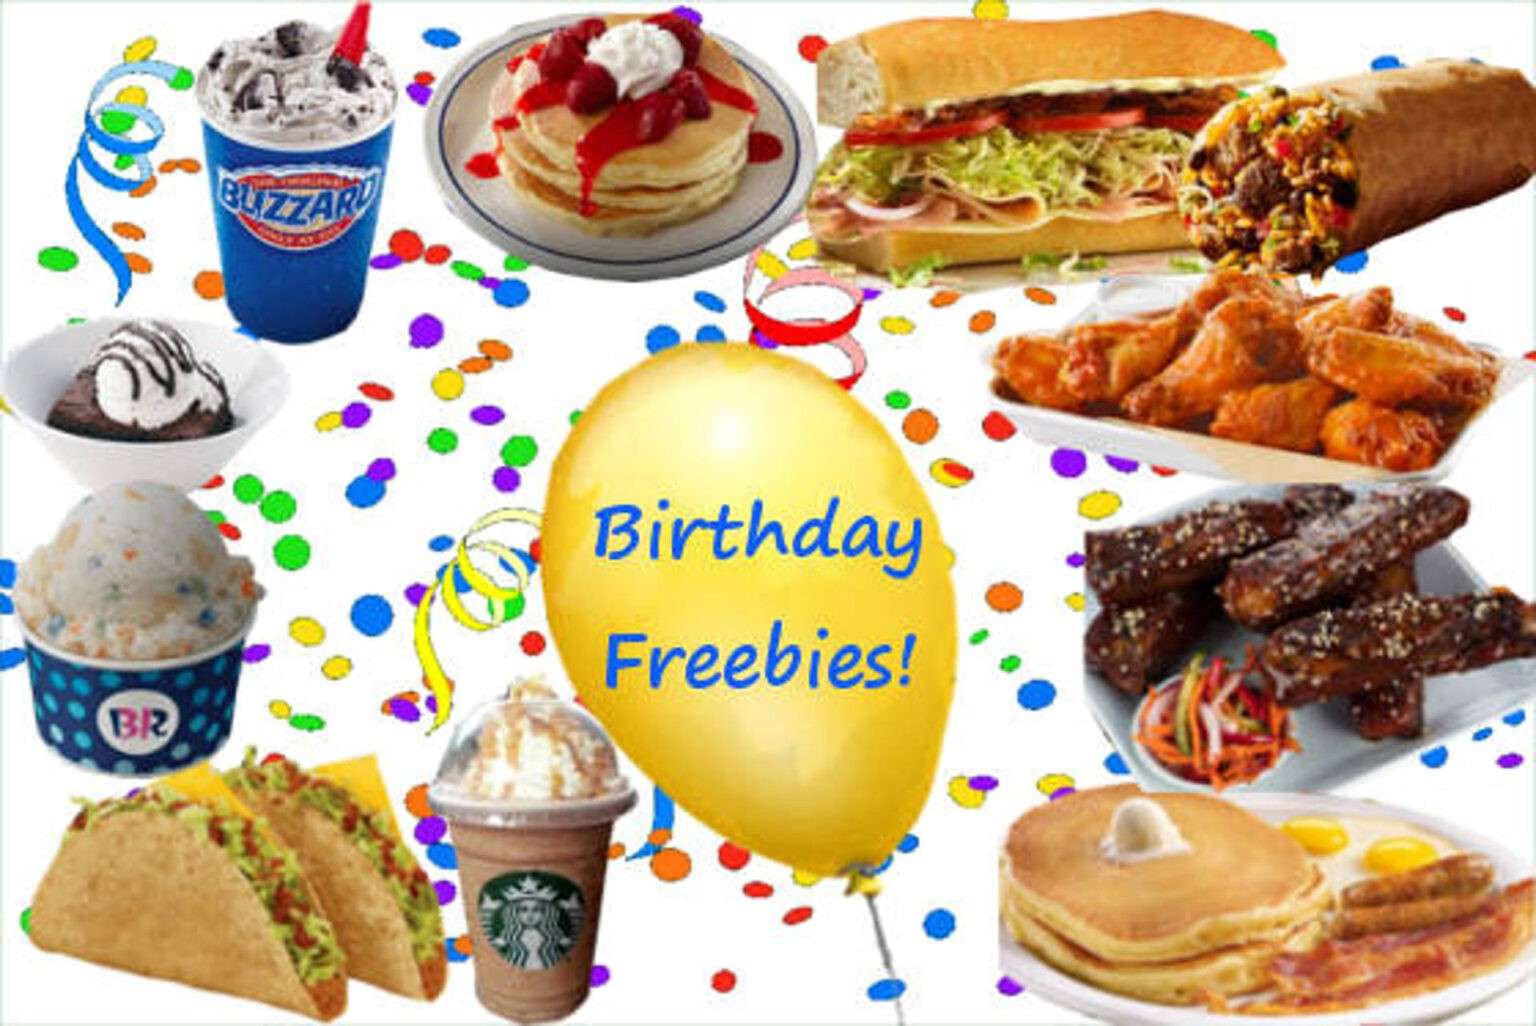 Restaurants That Give You Free Food on Your Birthday!